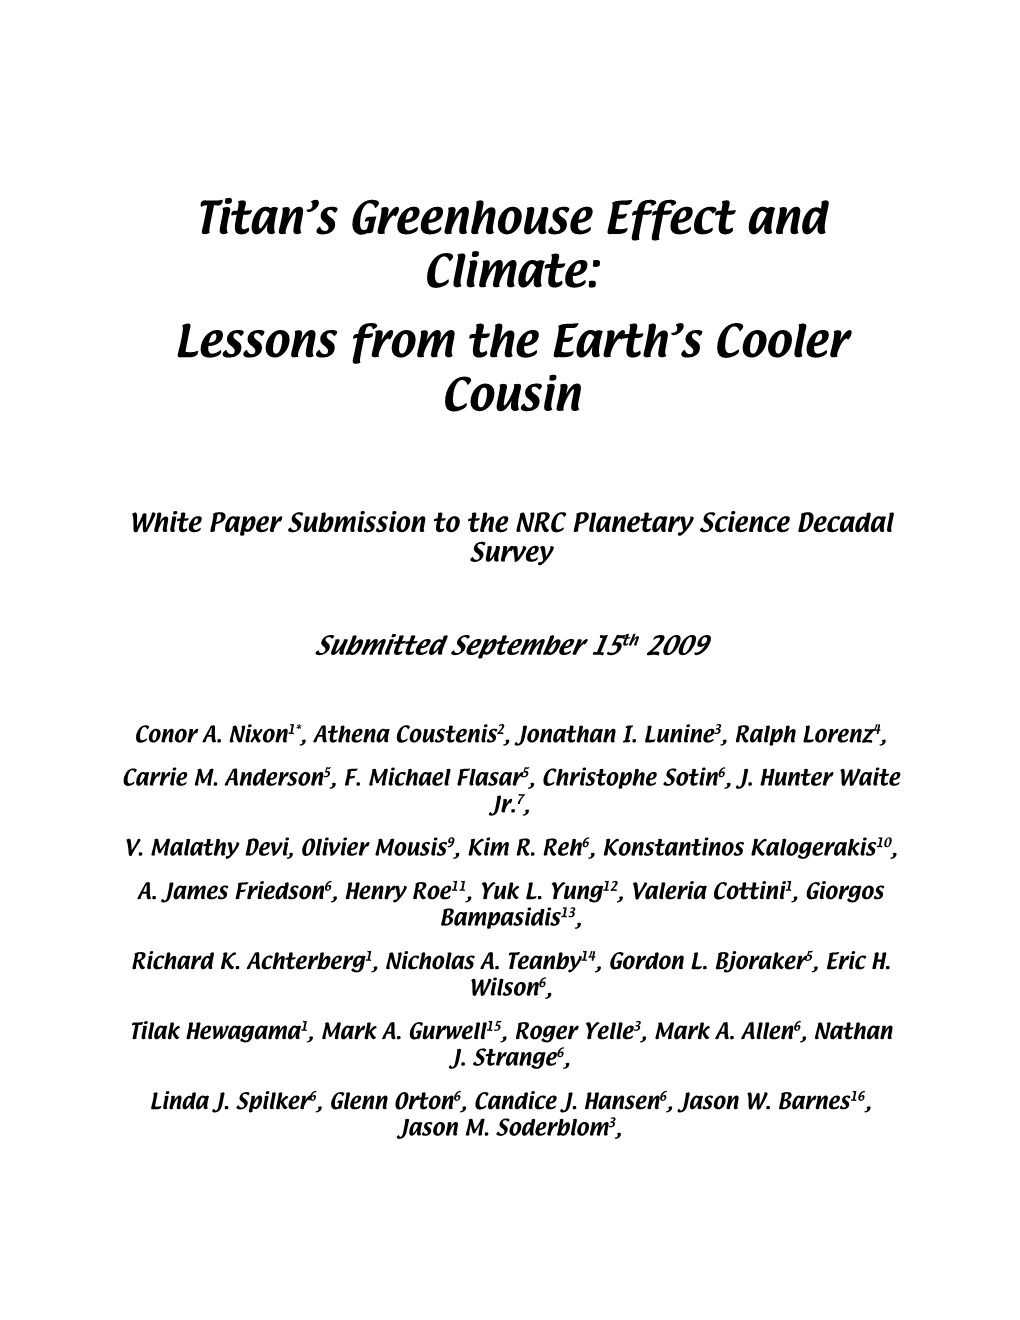 Titan's Greenhouse Effect and Climate